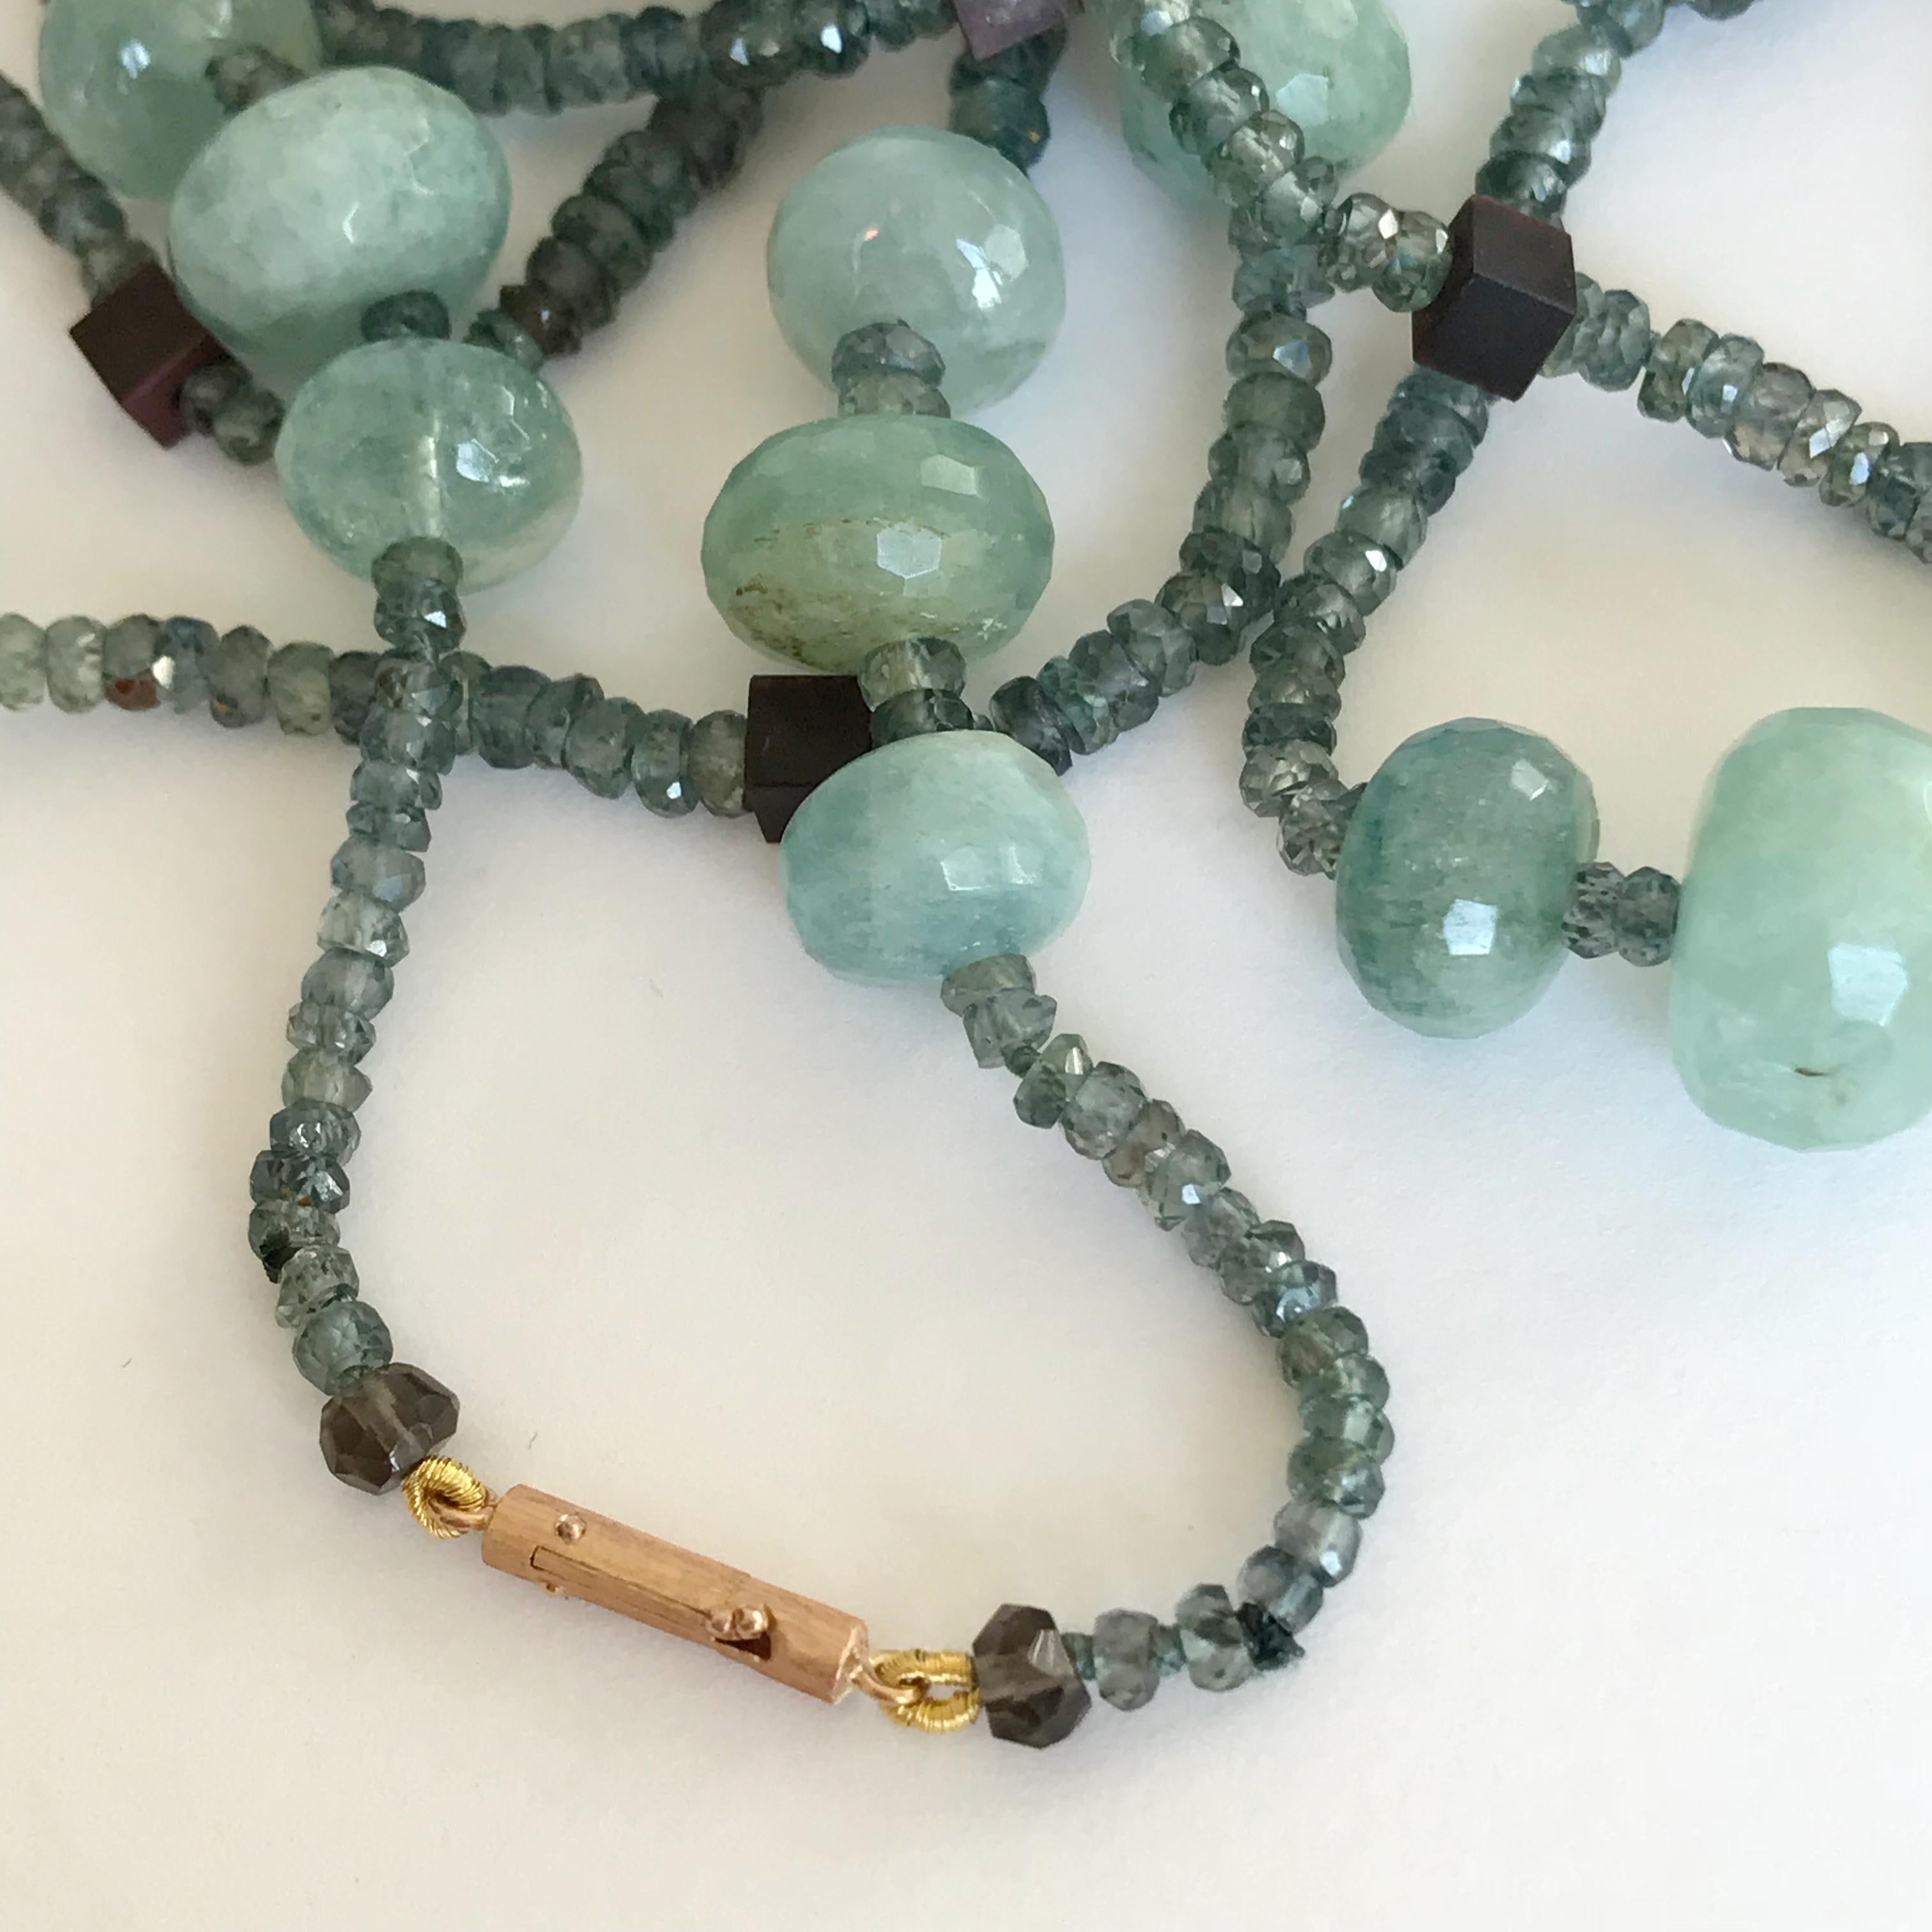 Dalben design long necklace composed of aquamarine big bead , green-grey sapphire faceted bead , iron stone cubic bead and a 18 k rose gold millerighe hand engraved closure. 
The necklace length is 40 inch ( 102 cm ).
Beads dimension : aquamarine